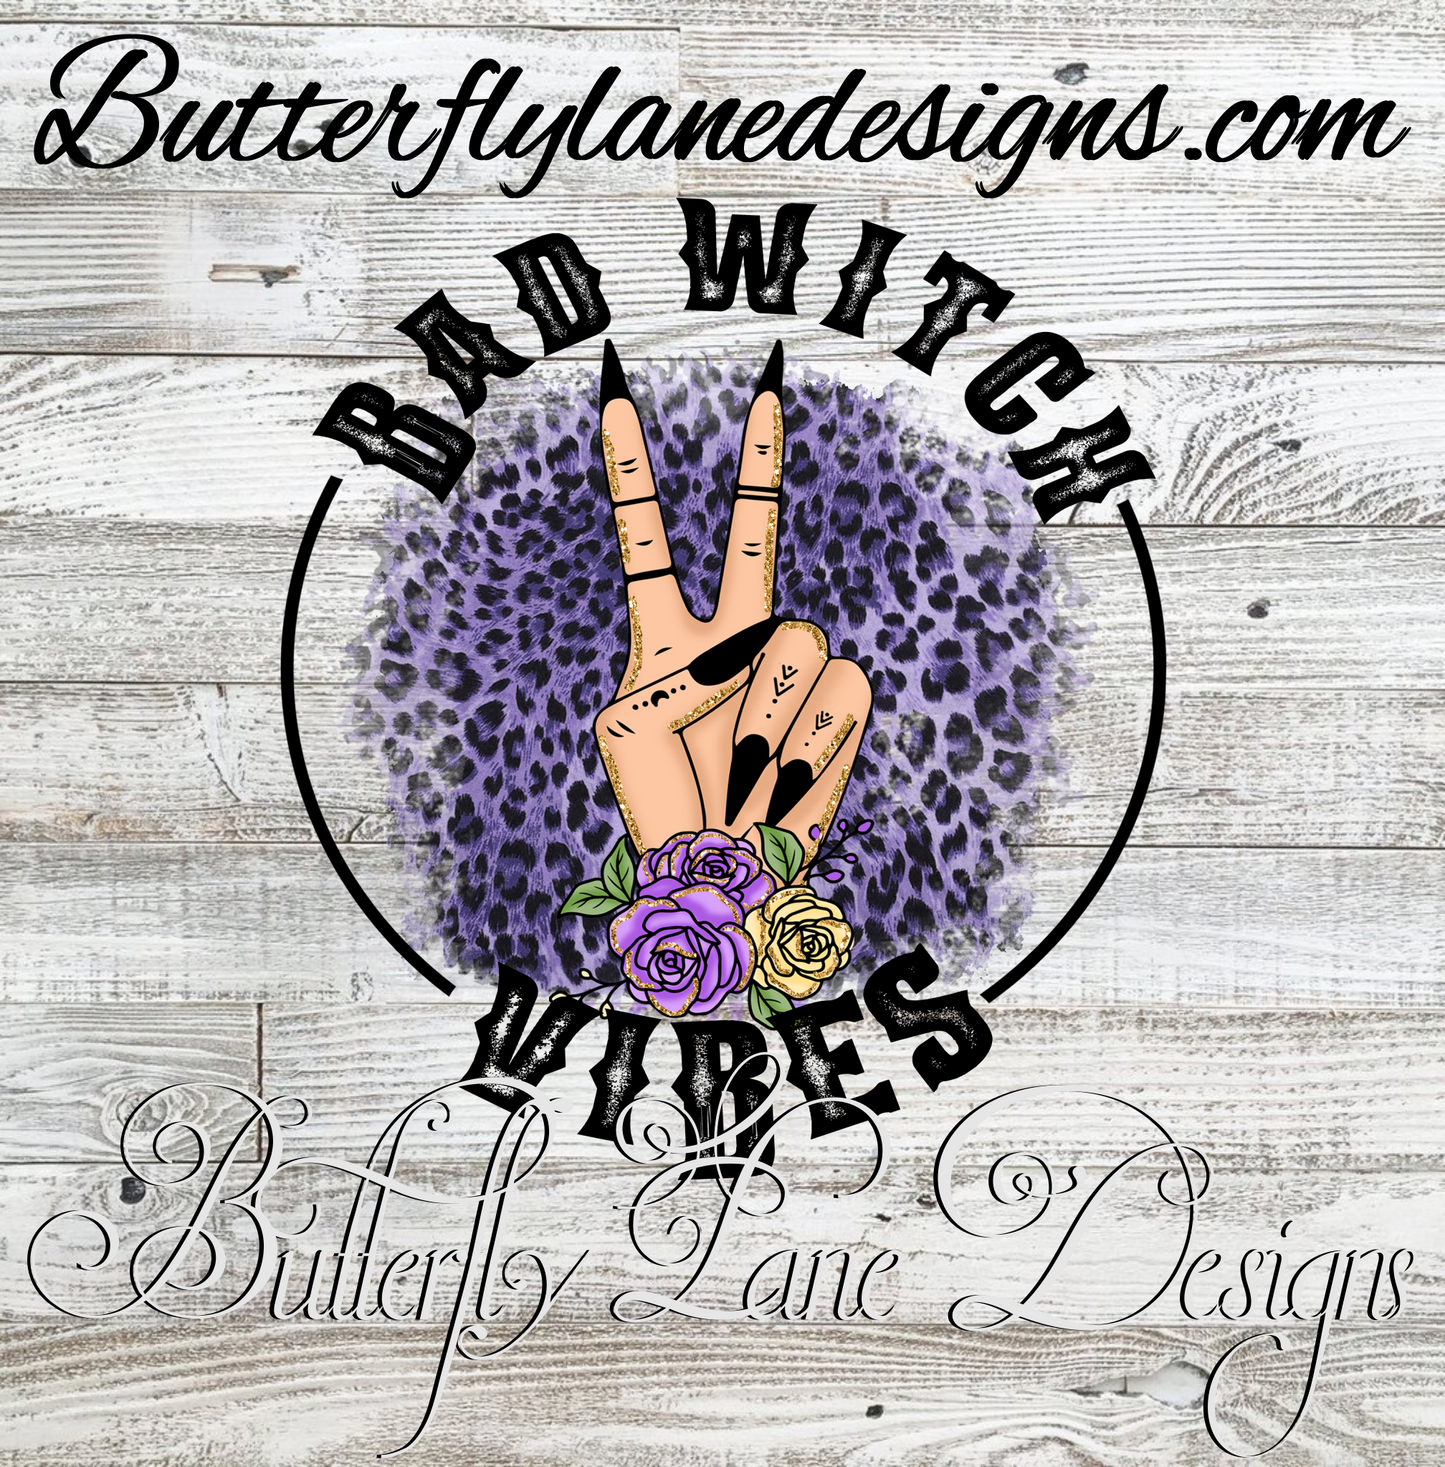 Bad witch vibes: Clear Decal :: VC Decal